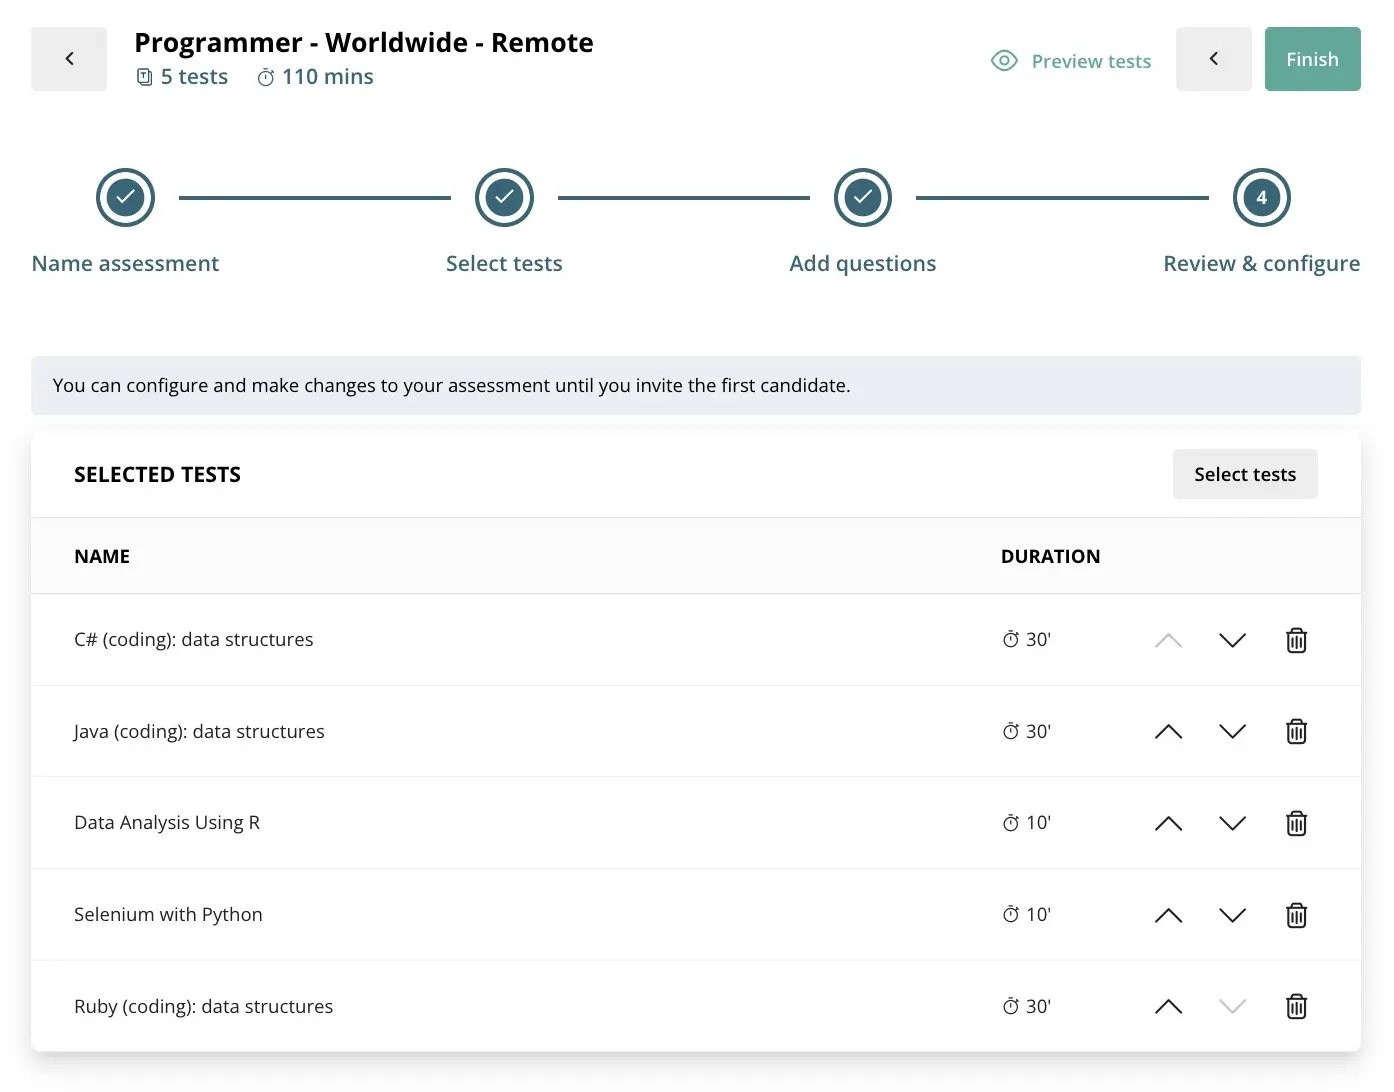 An overview of a series of talent assessments for a remote programmer, built using TestGorilla